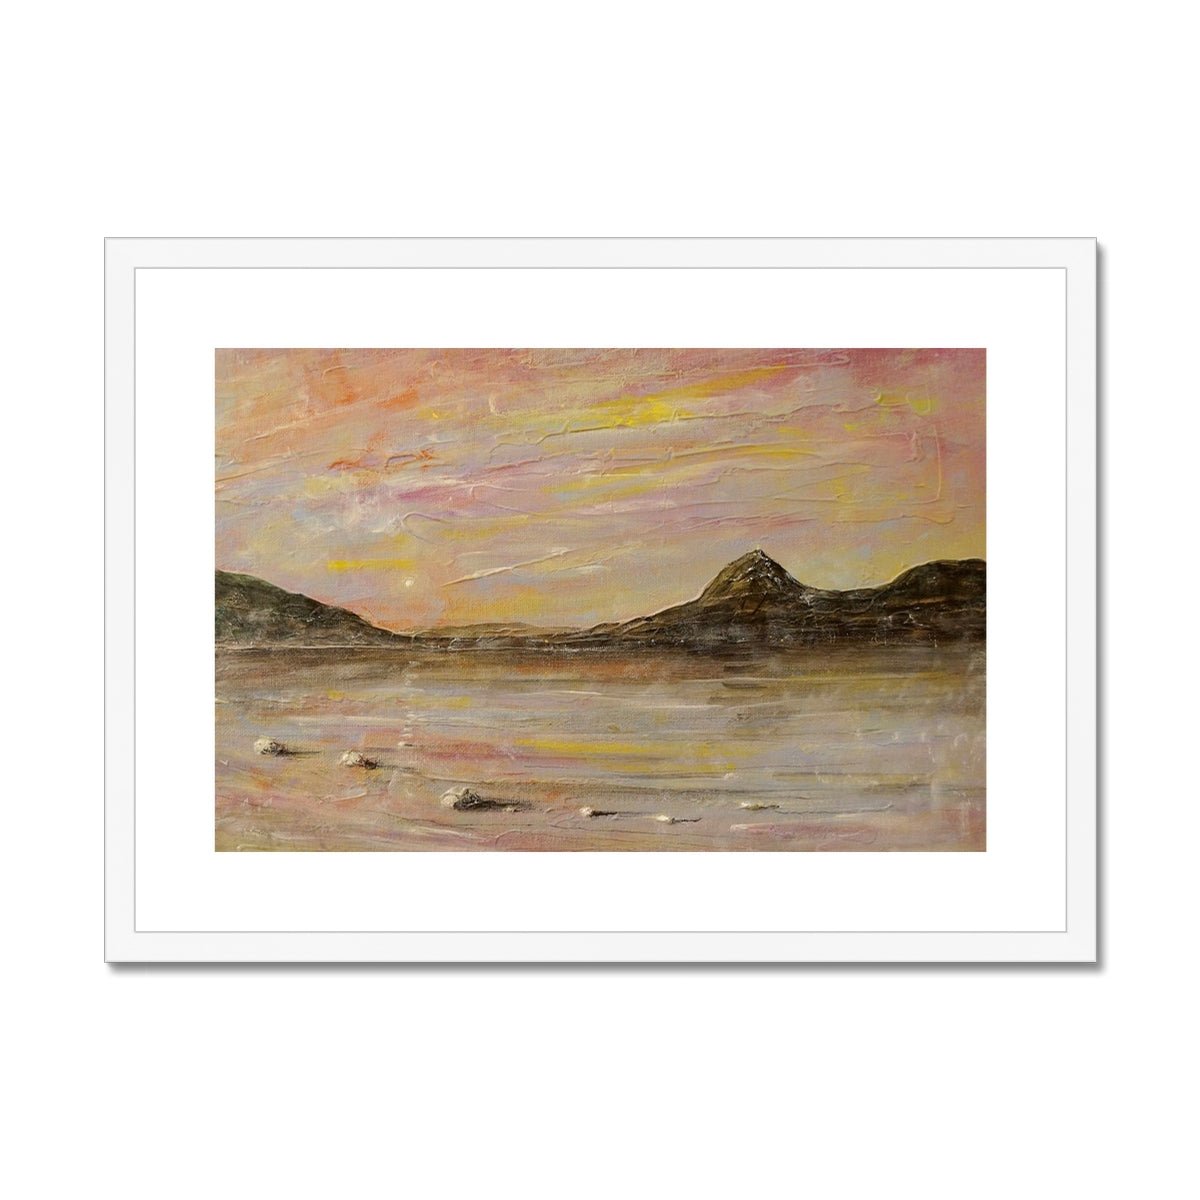 Loch Rannoch Dawn Painting | Framed & Mounted Prints From Scotland-Framed & Mounted Prints-Scottish Lochs & Mountains Art Gallery-A2 Landscape-White Frame-Paintings, Prints, Homeware, Art Gifts From Scotland By Scottish Artist Kevin Hunter